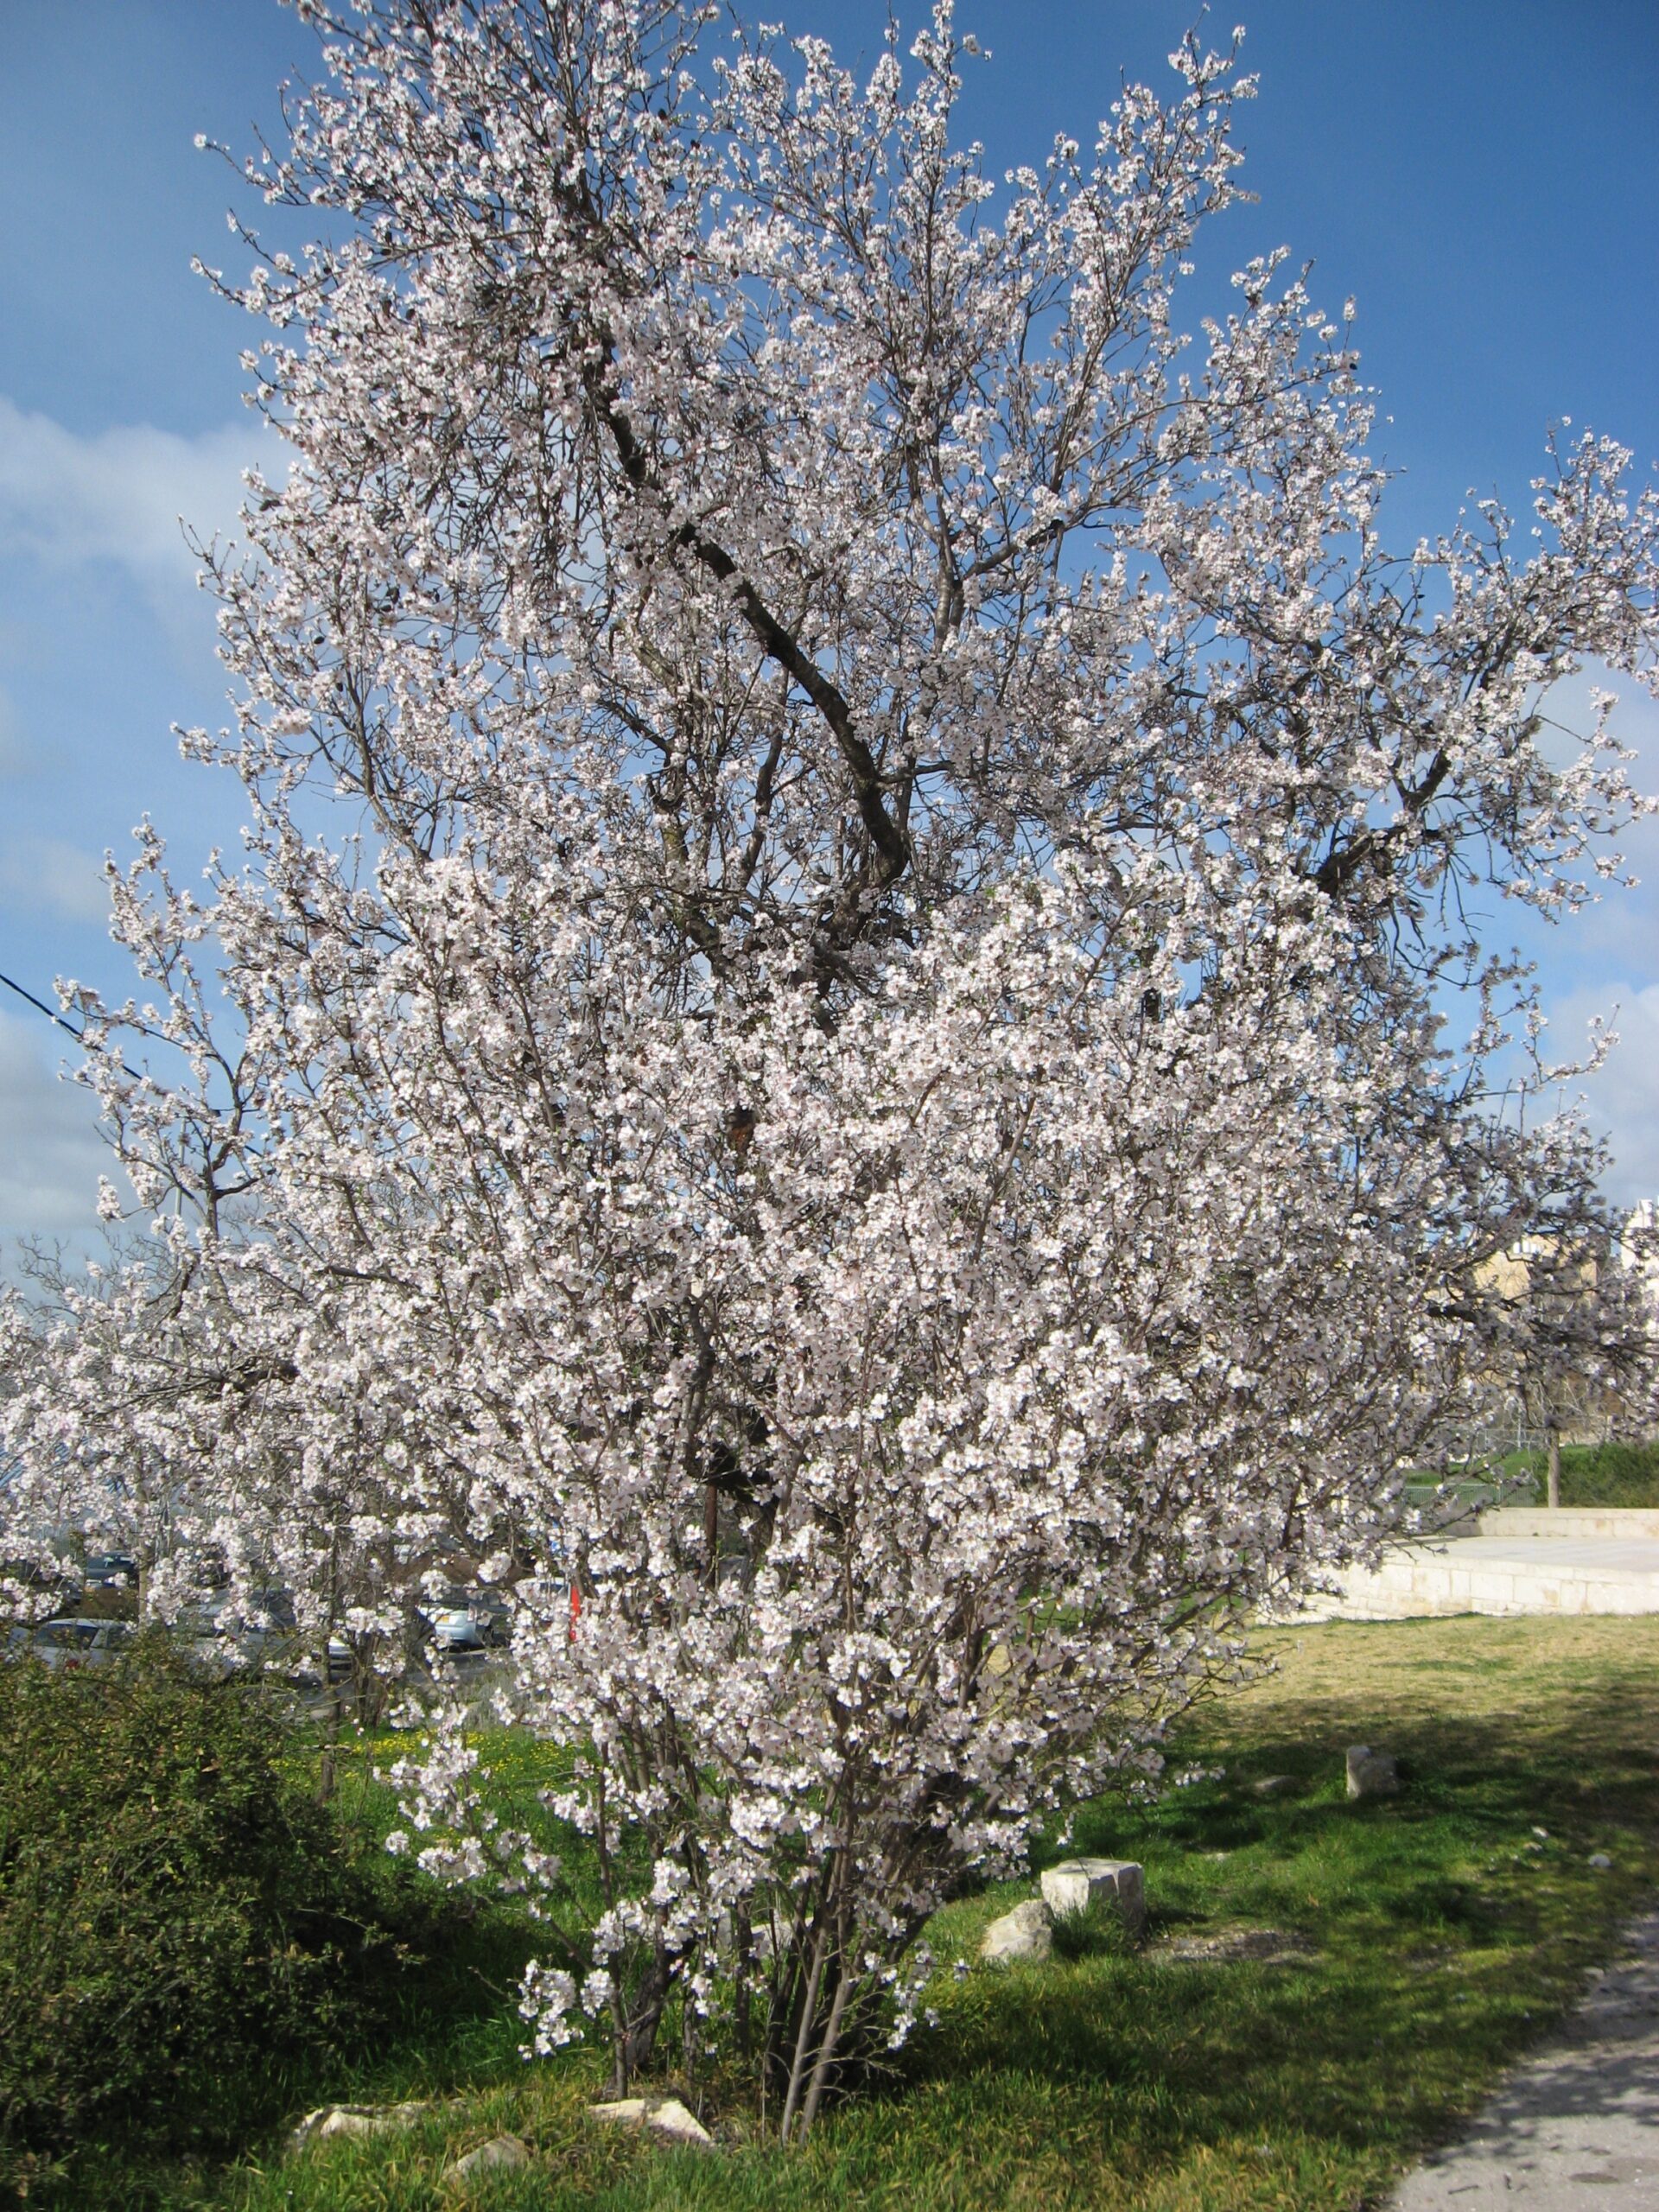 Almond Tree at Mount Scopus Lampstands for Hanukkah